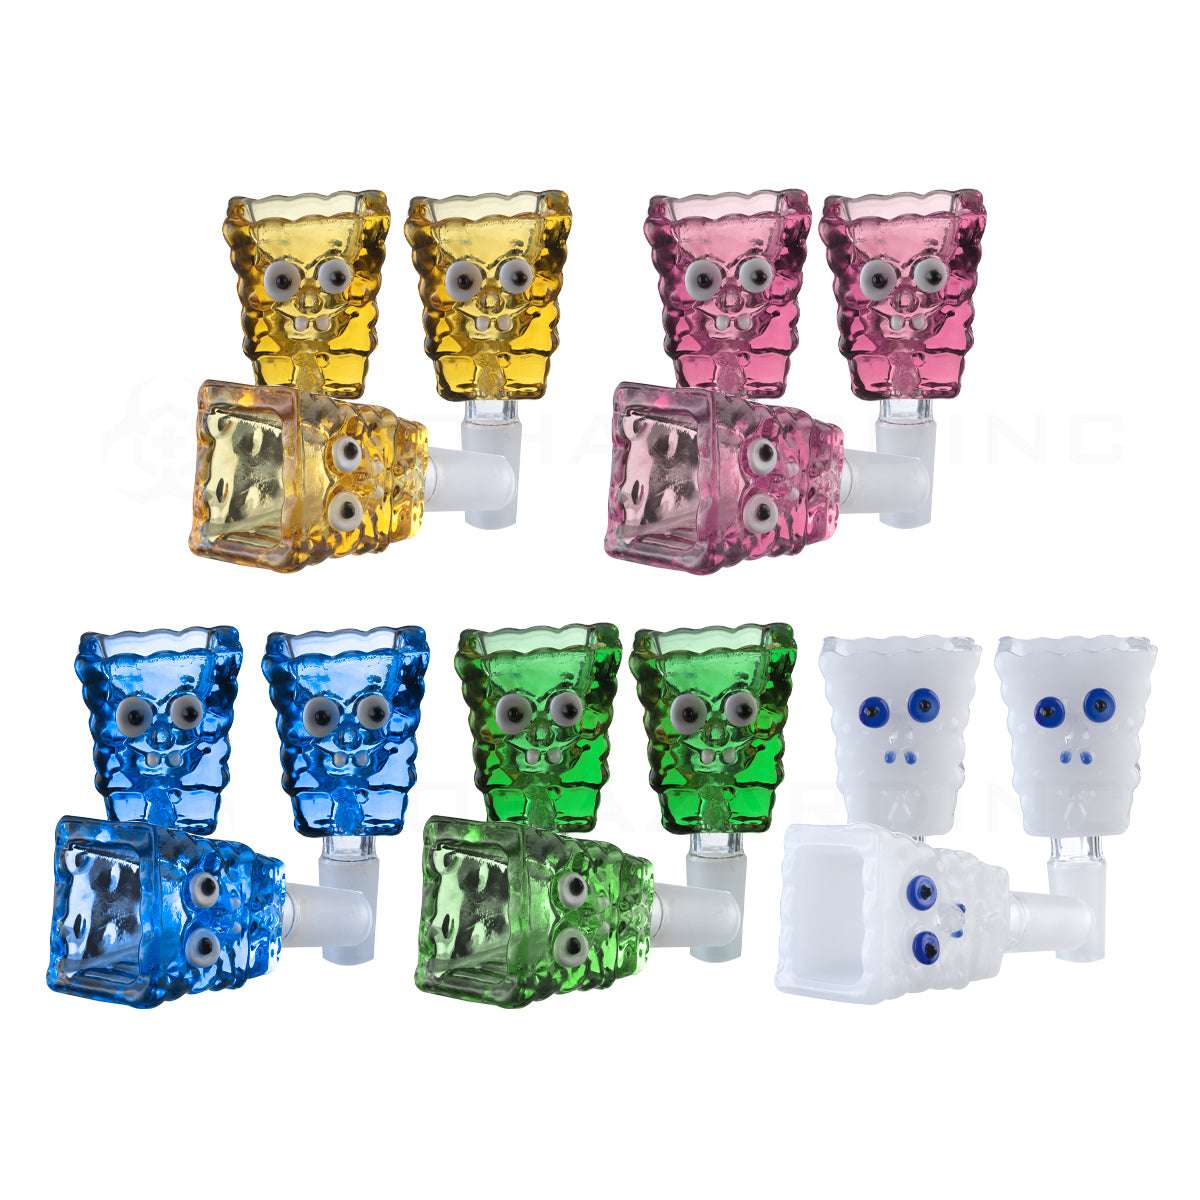 Novelty | SB Party Bowl | 14mm - Assorted Colors - 15 Count 14mm Bowl Biohazard Inc   